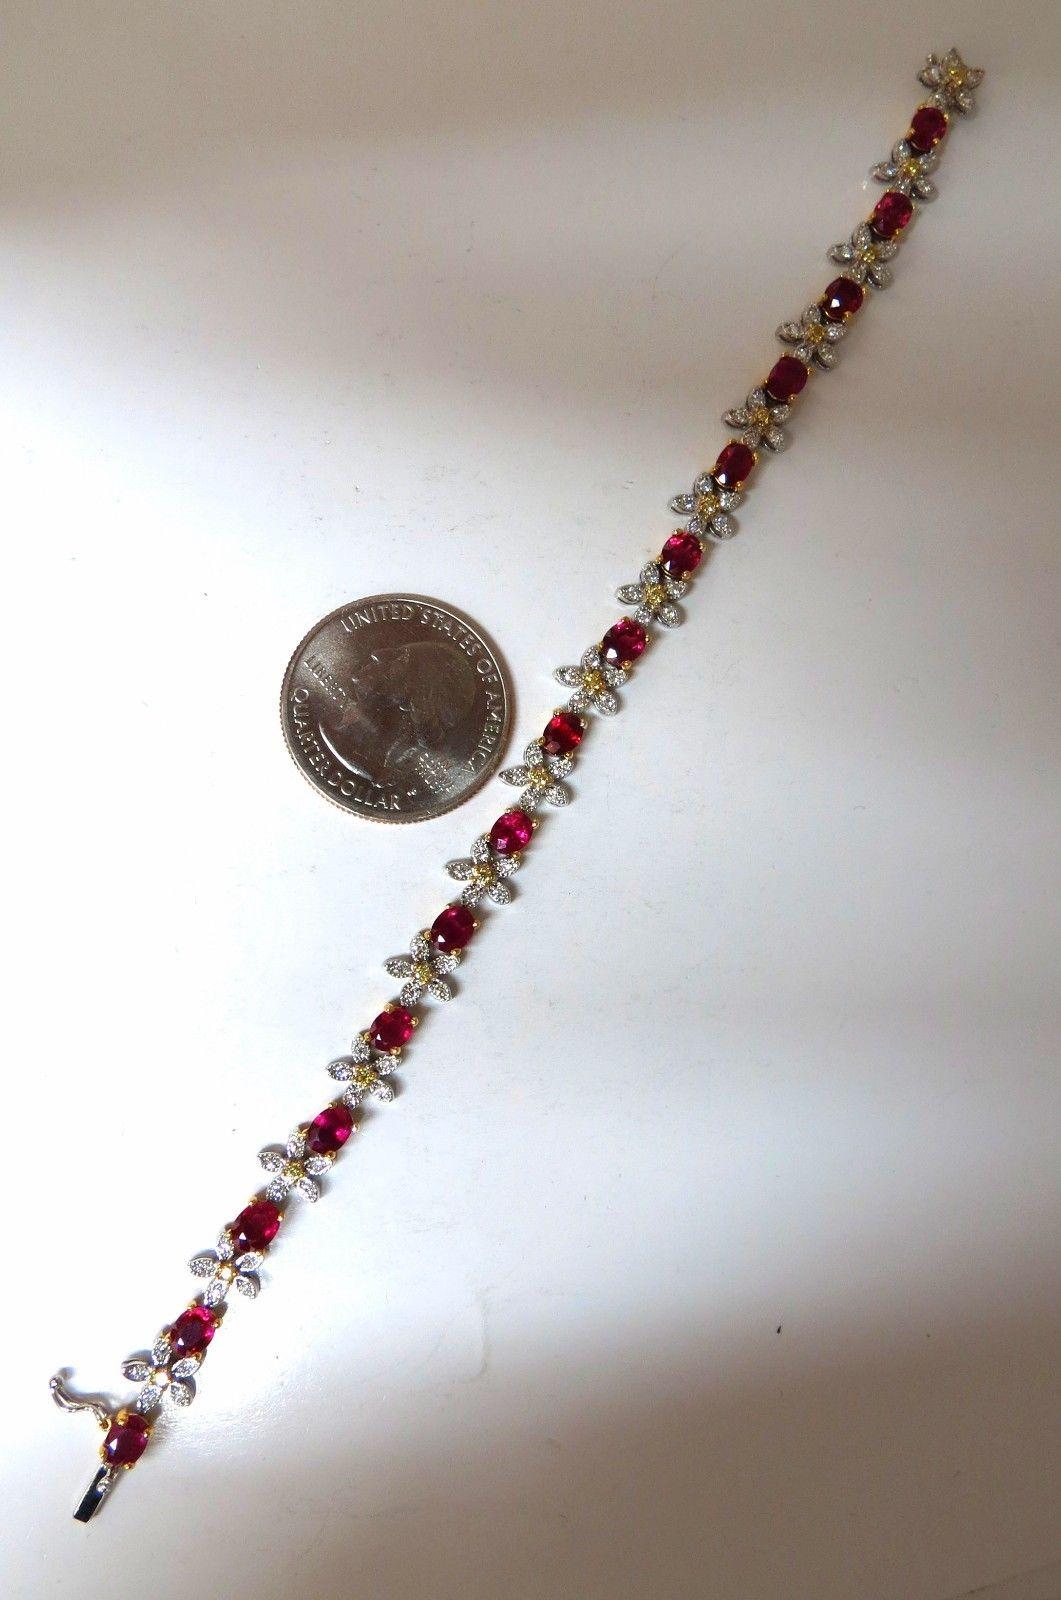 Ruby & Flower Tennis.

6.68ct. Natural ruby bracelet.

Oval, full cuts 

Clean clarity

Transparent & Vivid Reds.

Average 4 x 5mm each

.40ct Natural Diamonds

Rounds & full cuts

Vs-2 clarity G color

.20ct Natural Fancy Yellow Diamonds.

18kt.